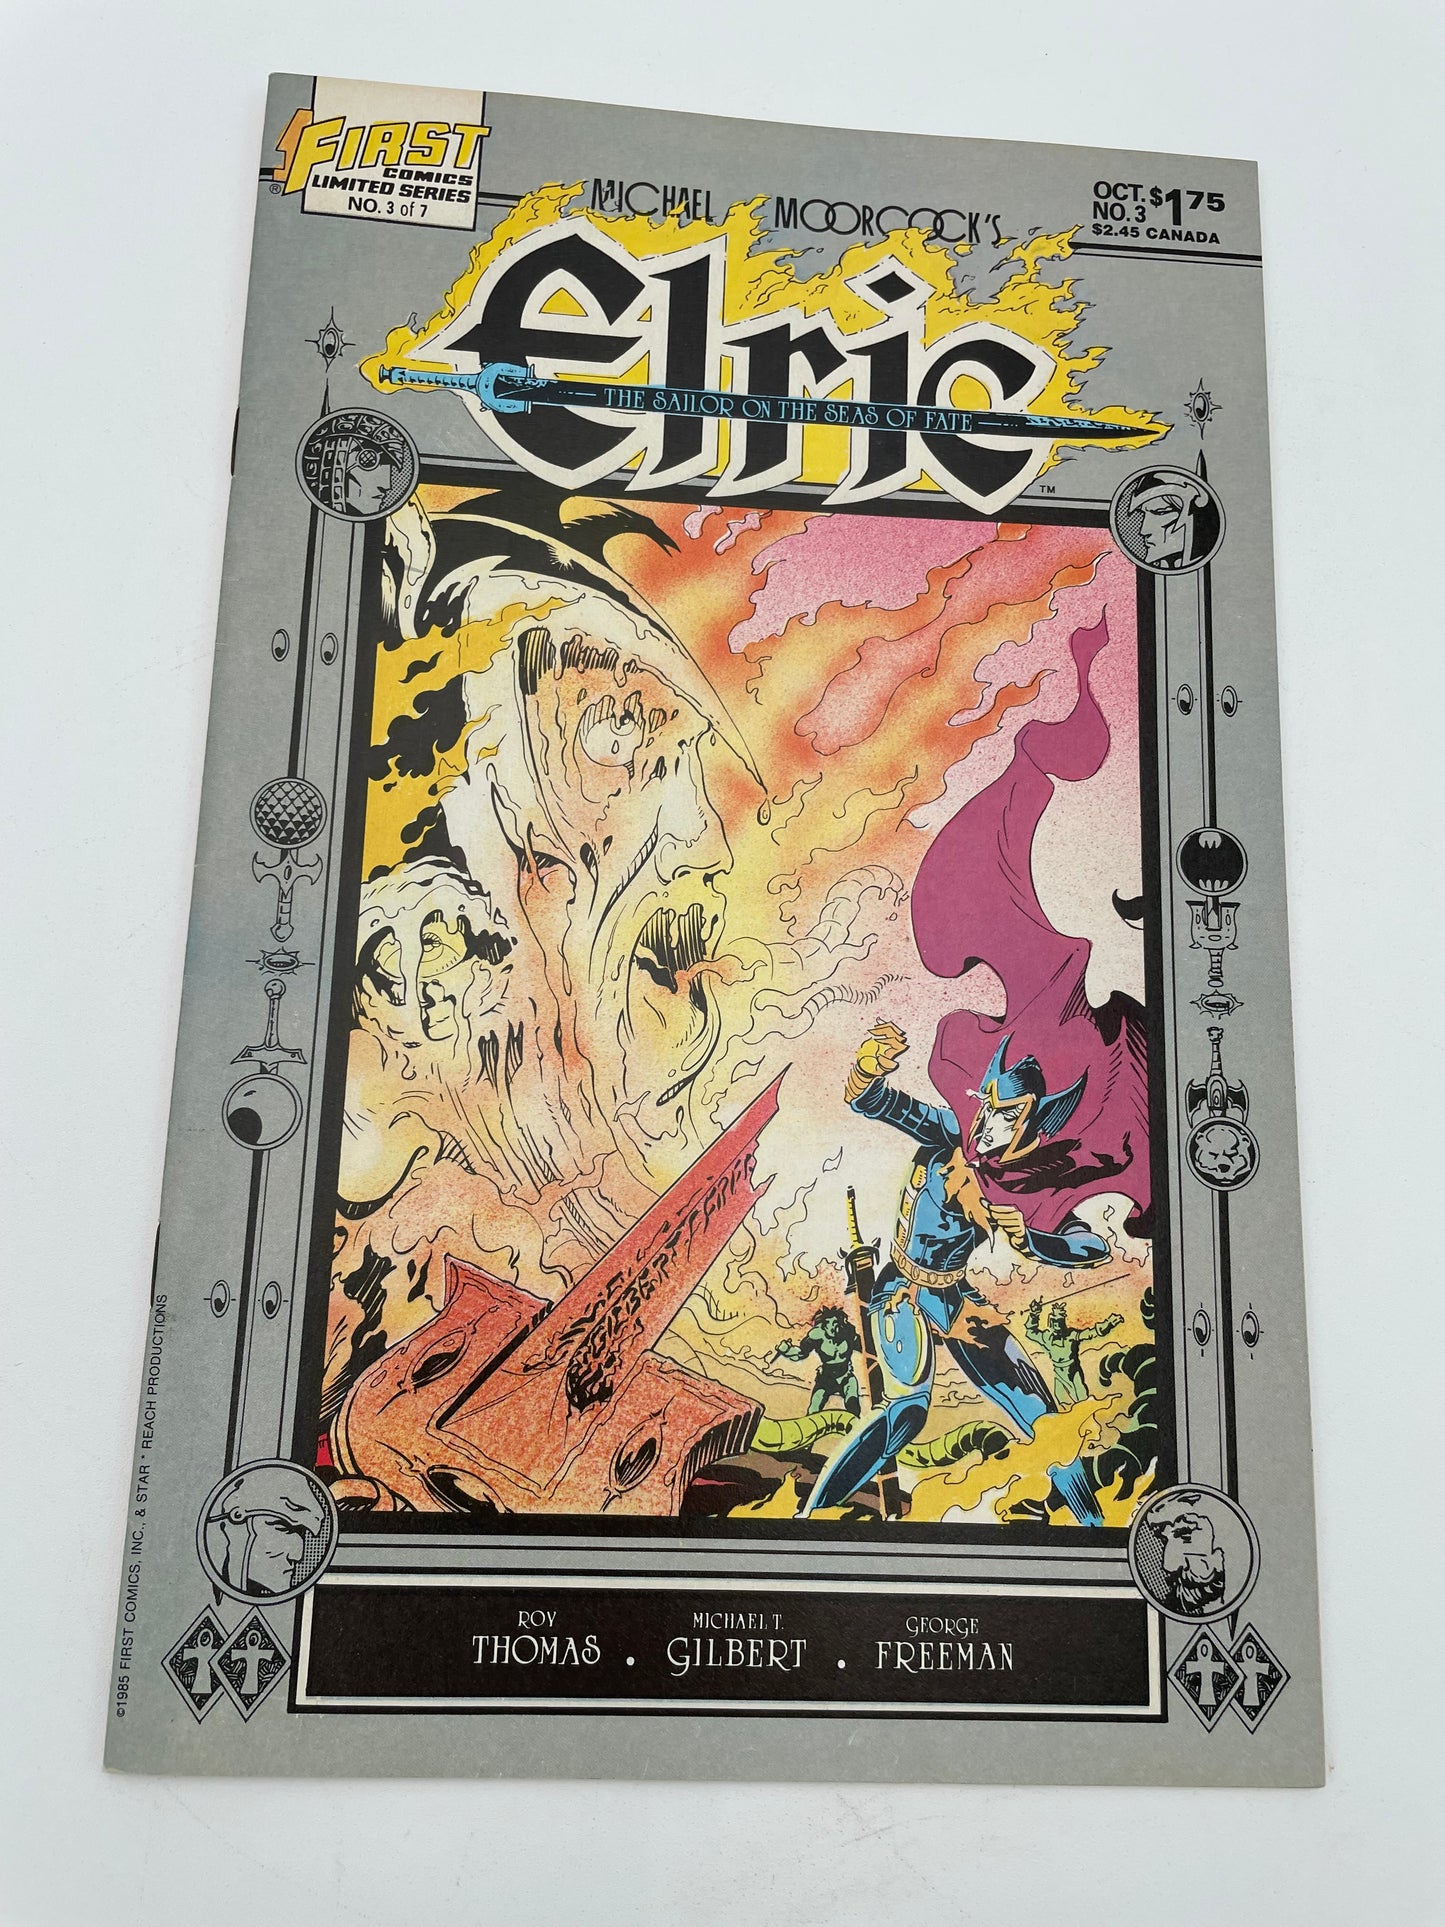 First Comics - Elric #3 of 7 October 1985 #102380